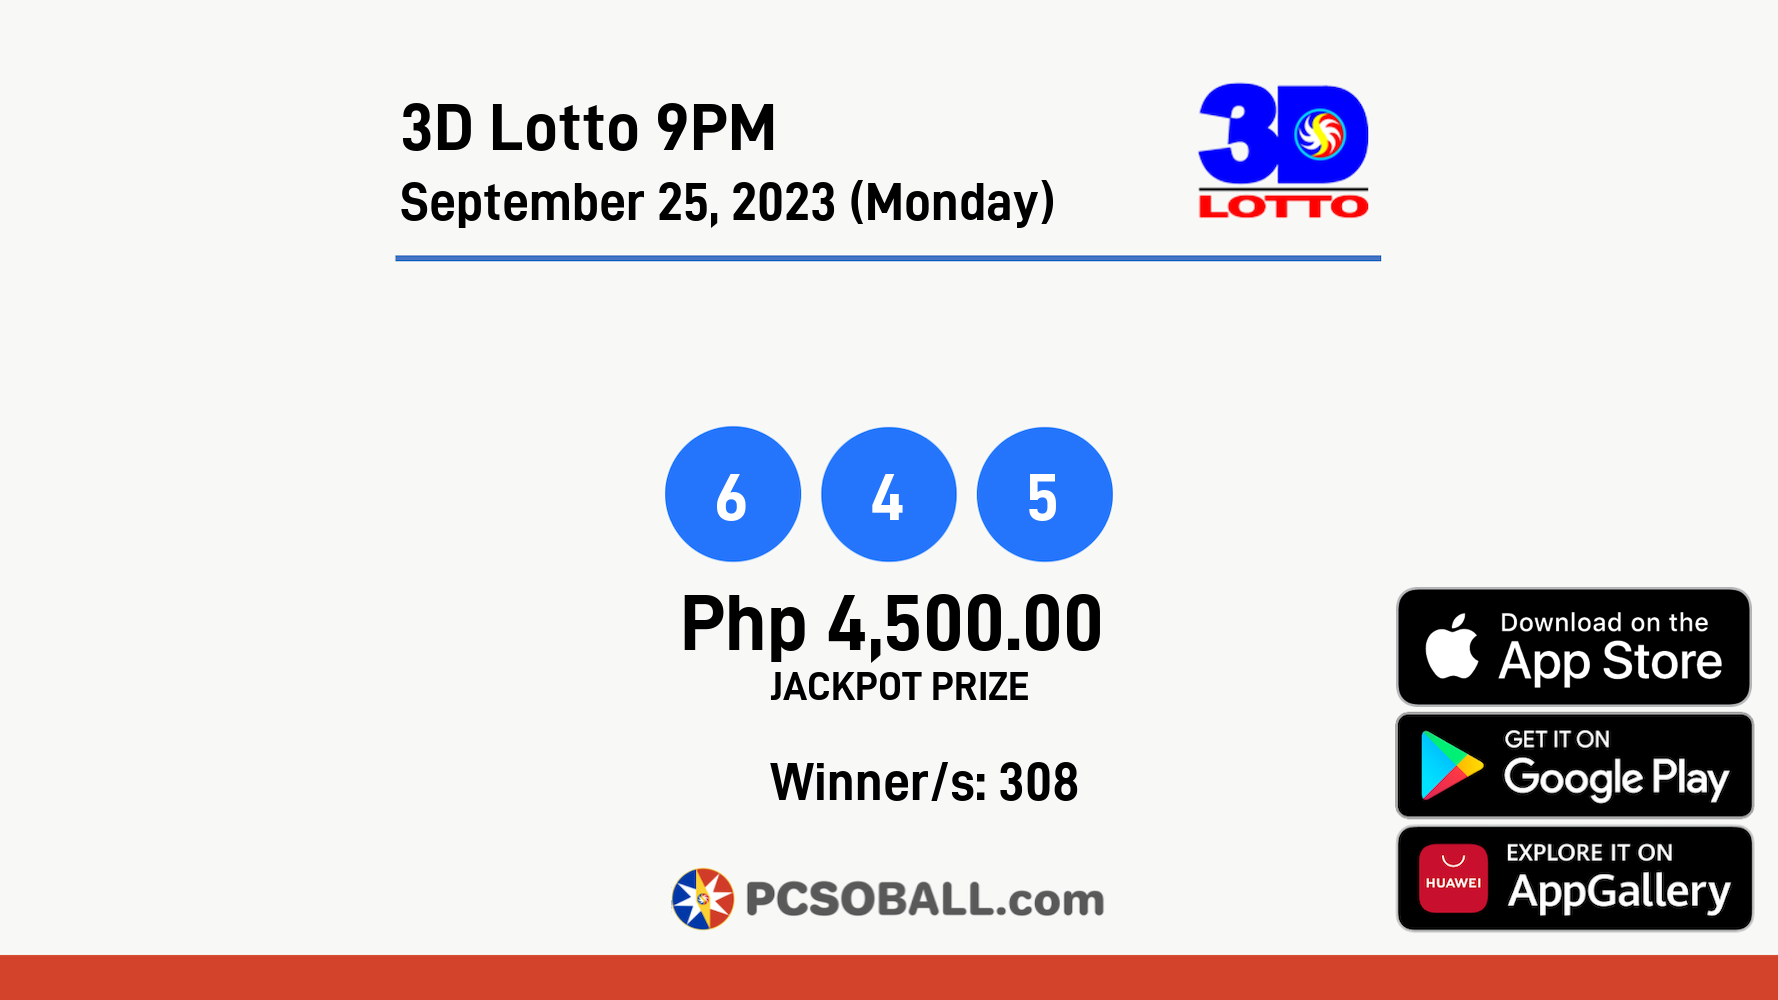 3D Lotto 9PM September 25, 2023 (Monday) Result